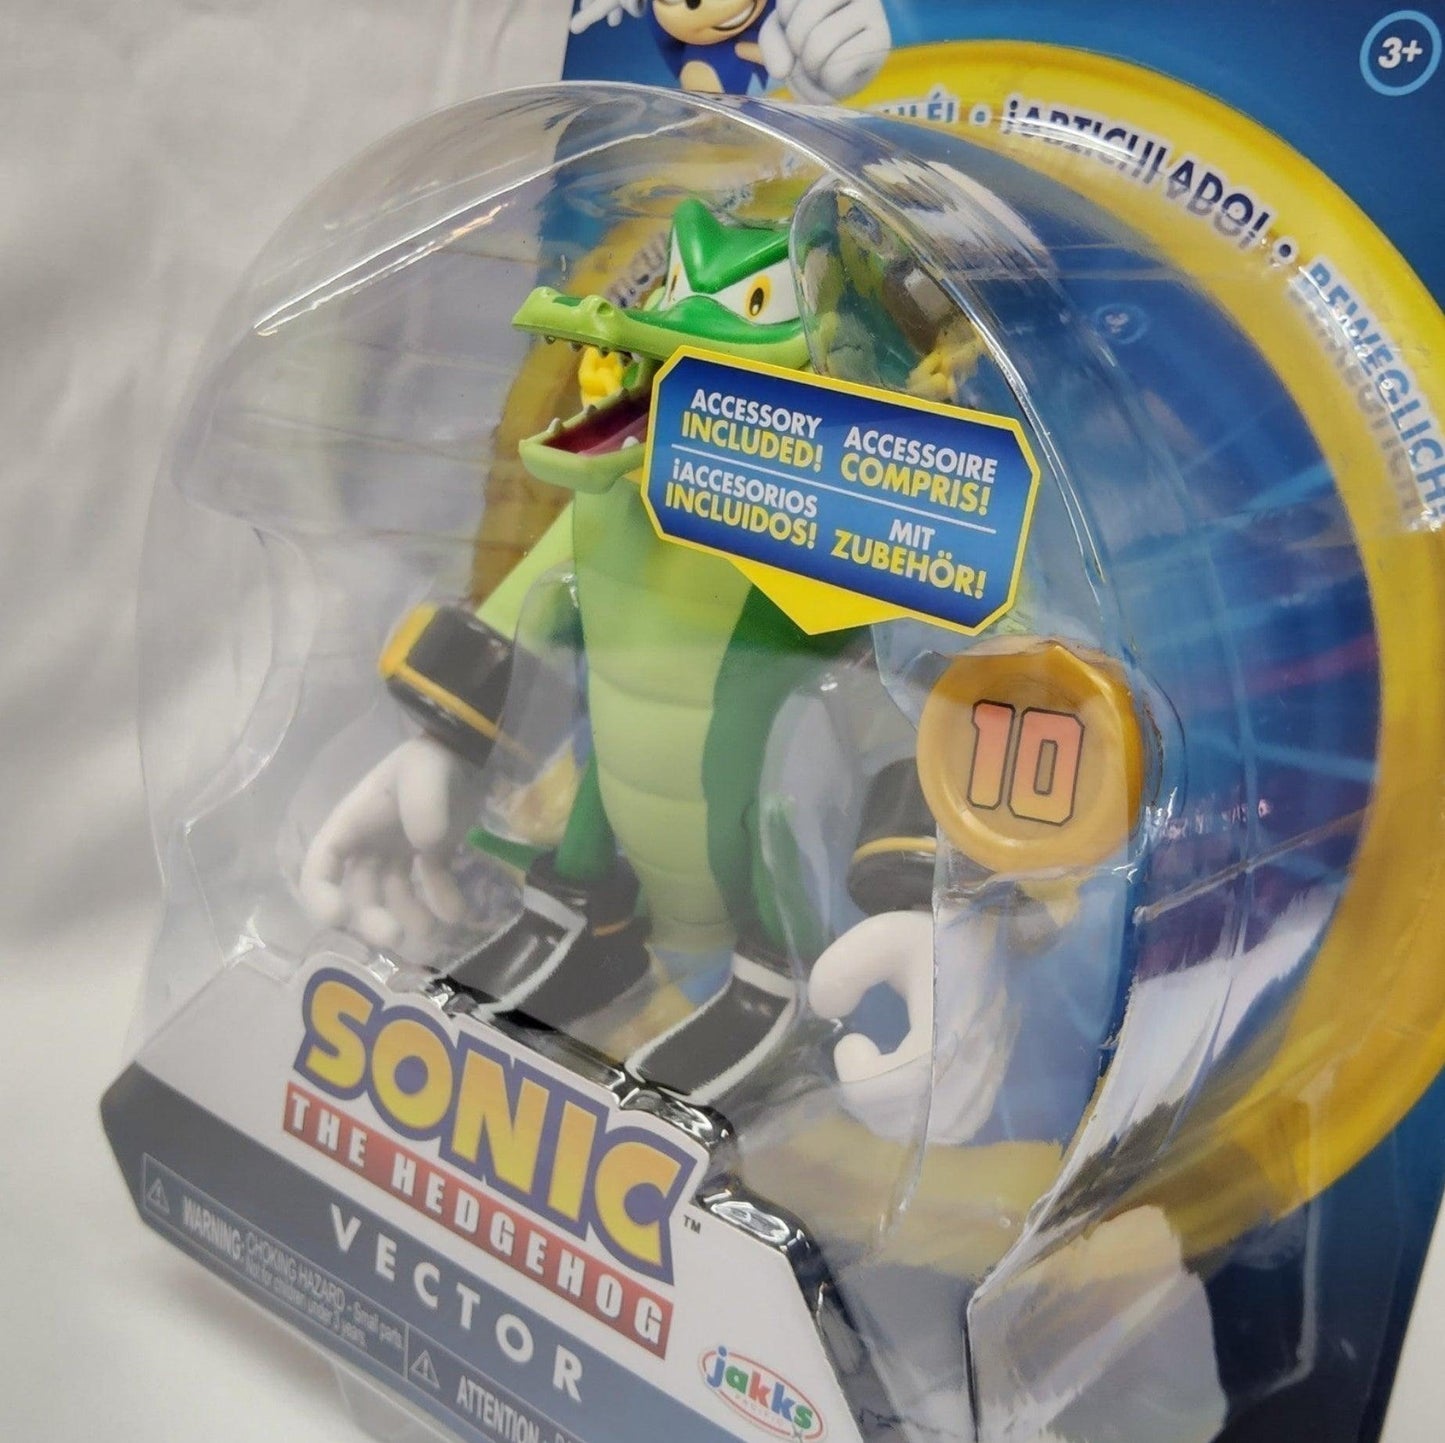 Sonic the Hedgehog Vector the Crocodile 4" Action Figure & Super Ring - Logan's Toy Chest